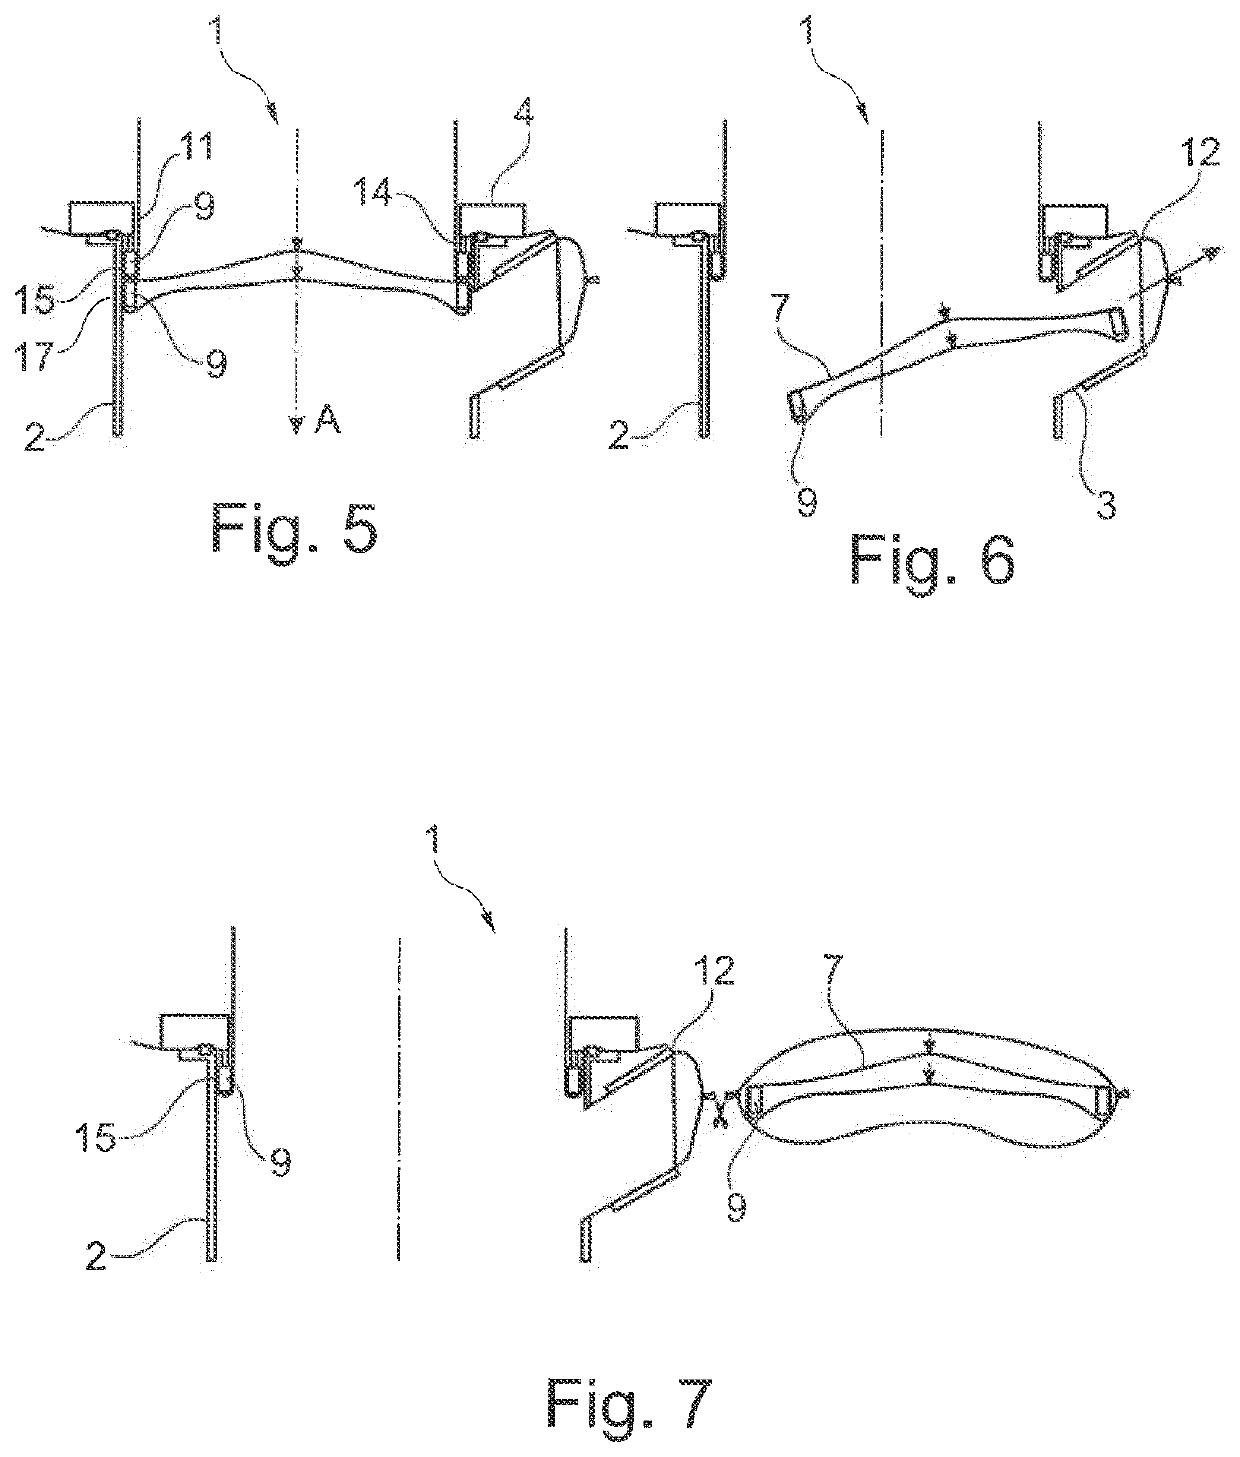 Method and apparatus for filling and/or emptying flexible containers